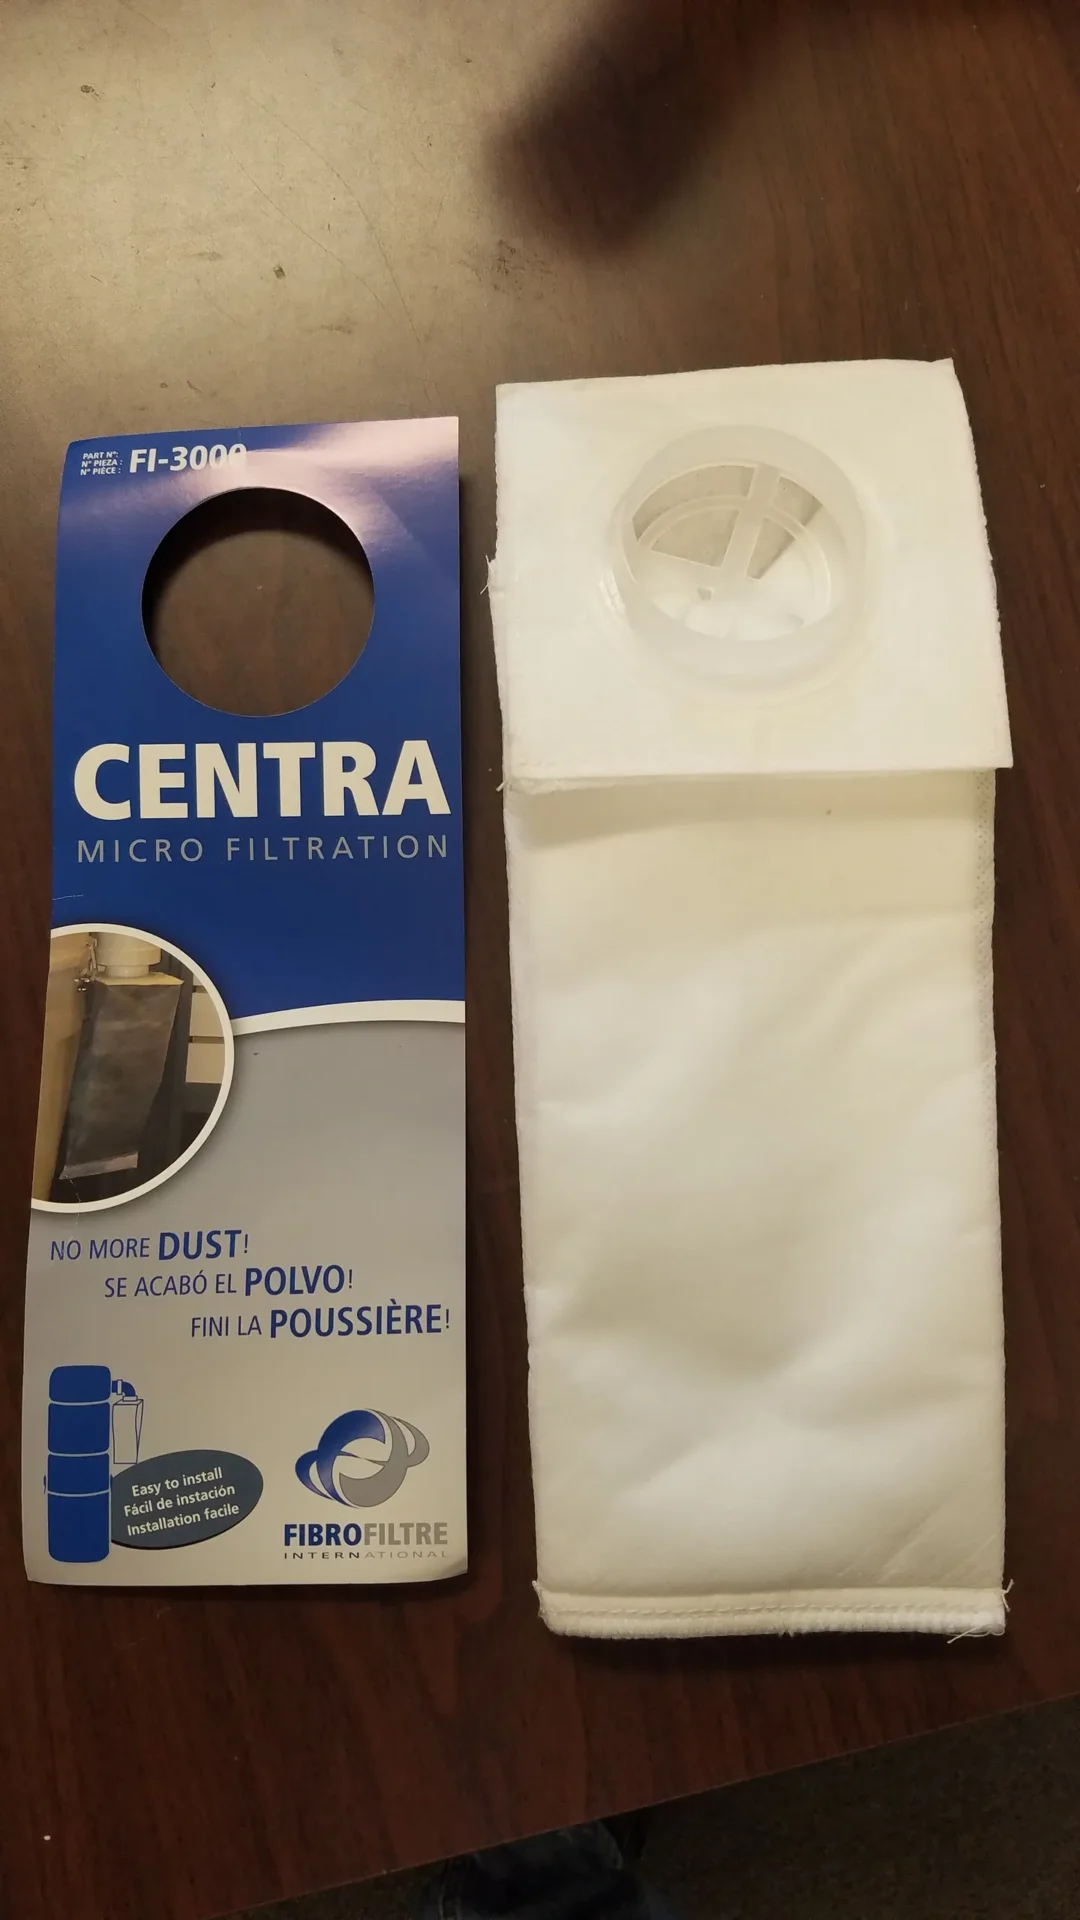 A box of the central vacuum cleaner bag.